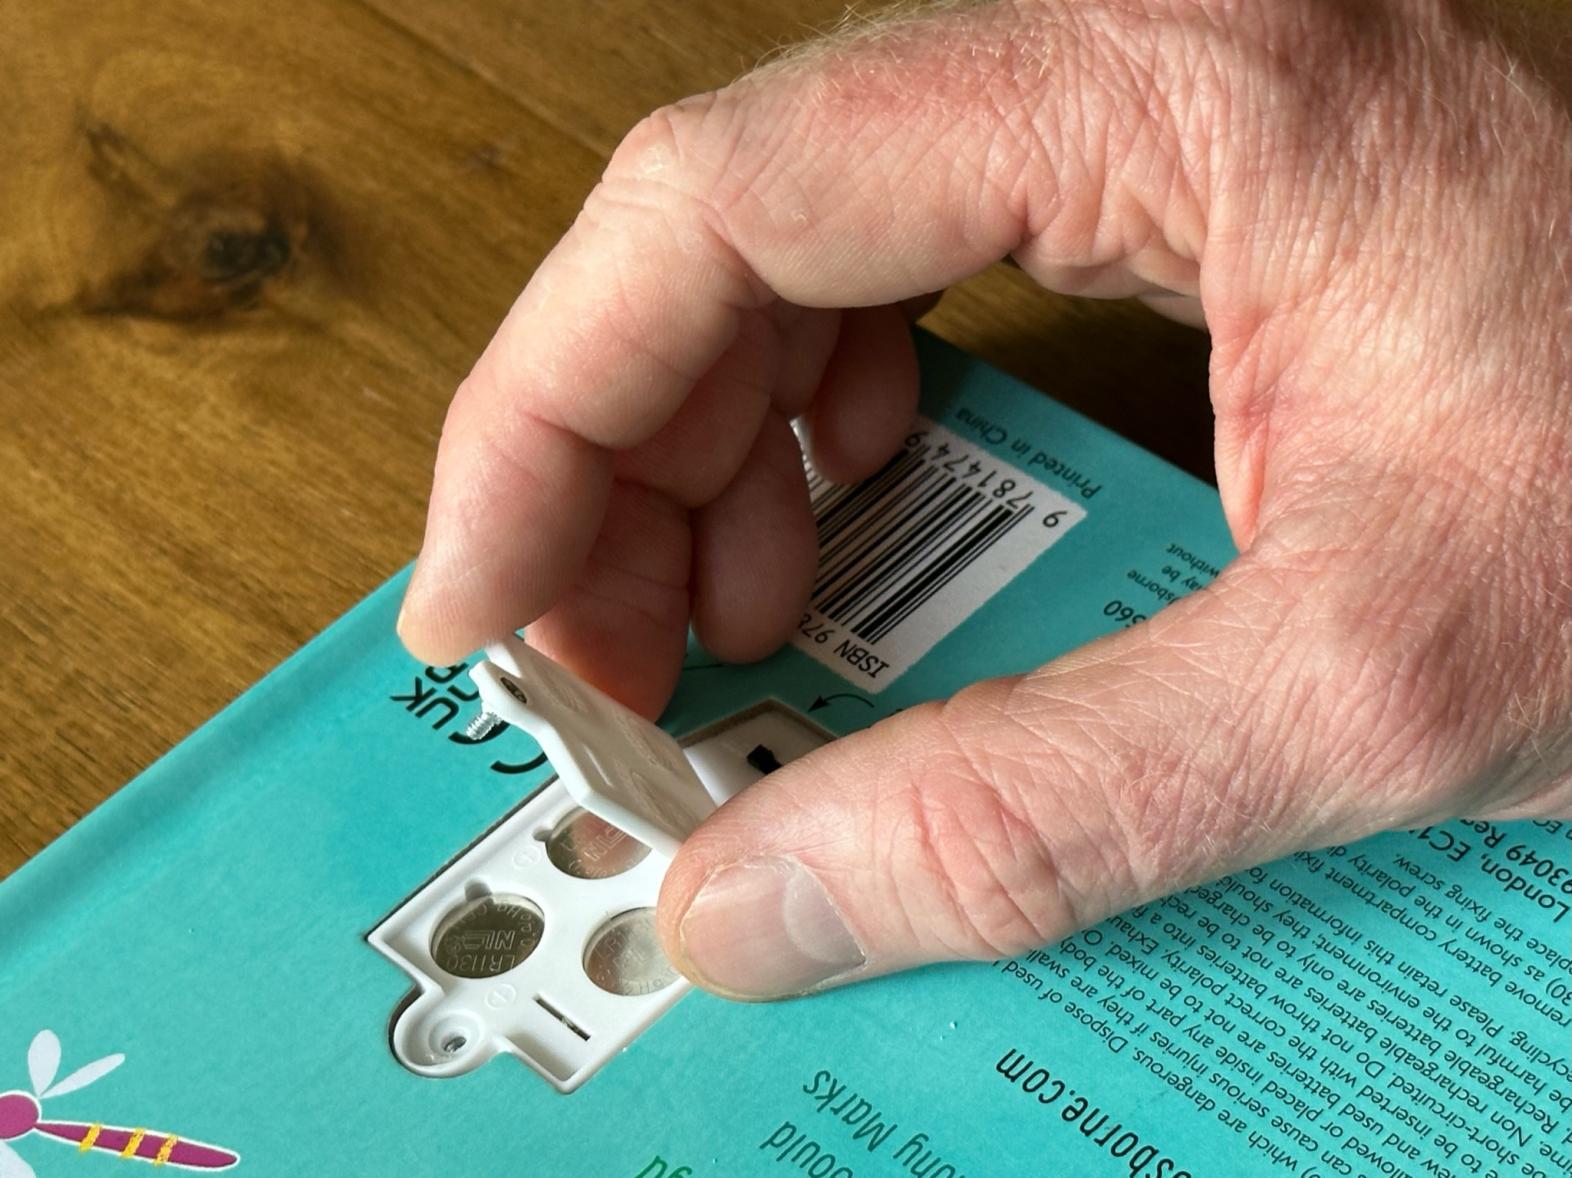 An adult removes the battery cover from a children's toy, exposing three button cell batteries